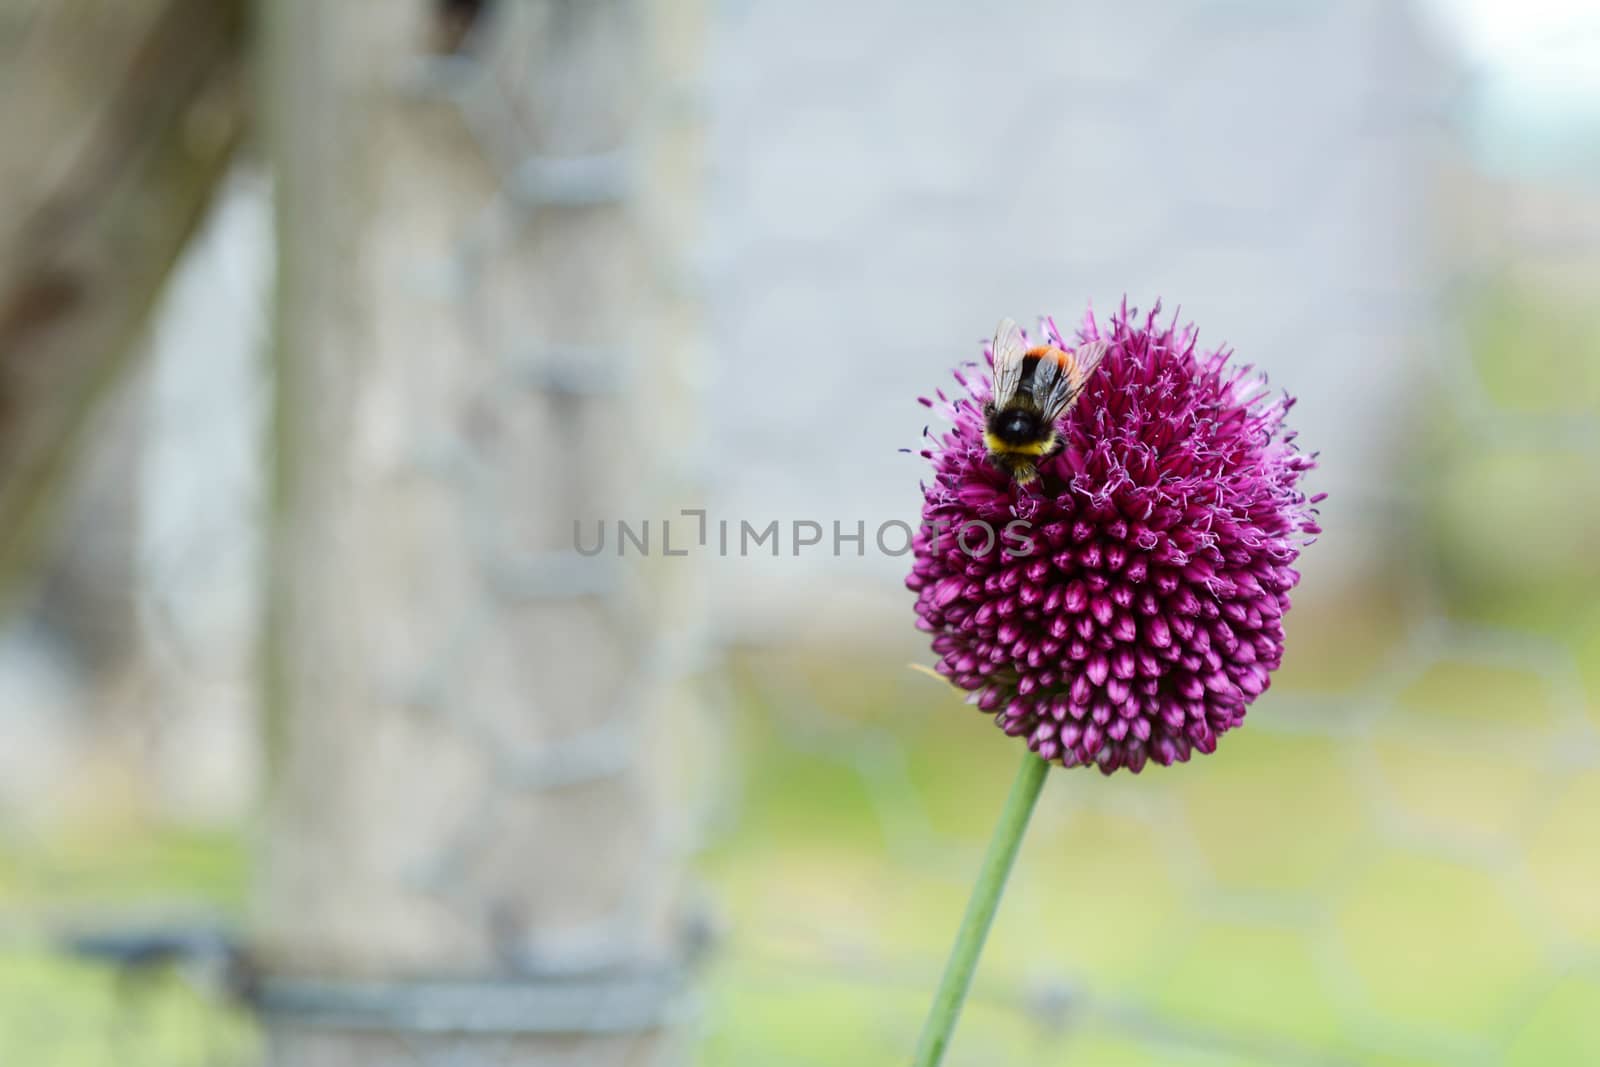 Red-tailed bumblebee on a purple allium flower with copy space